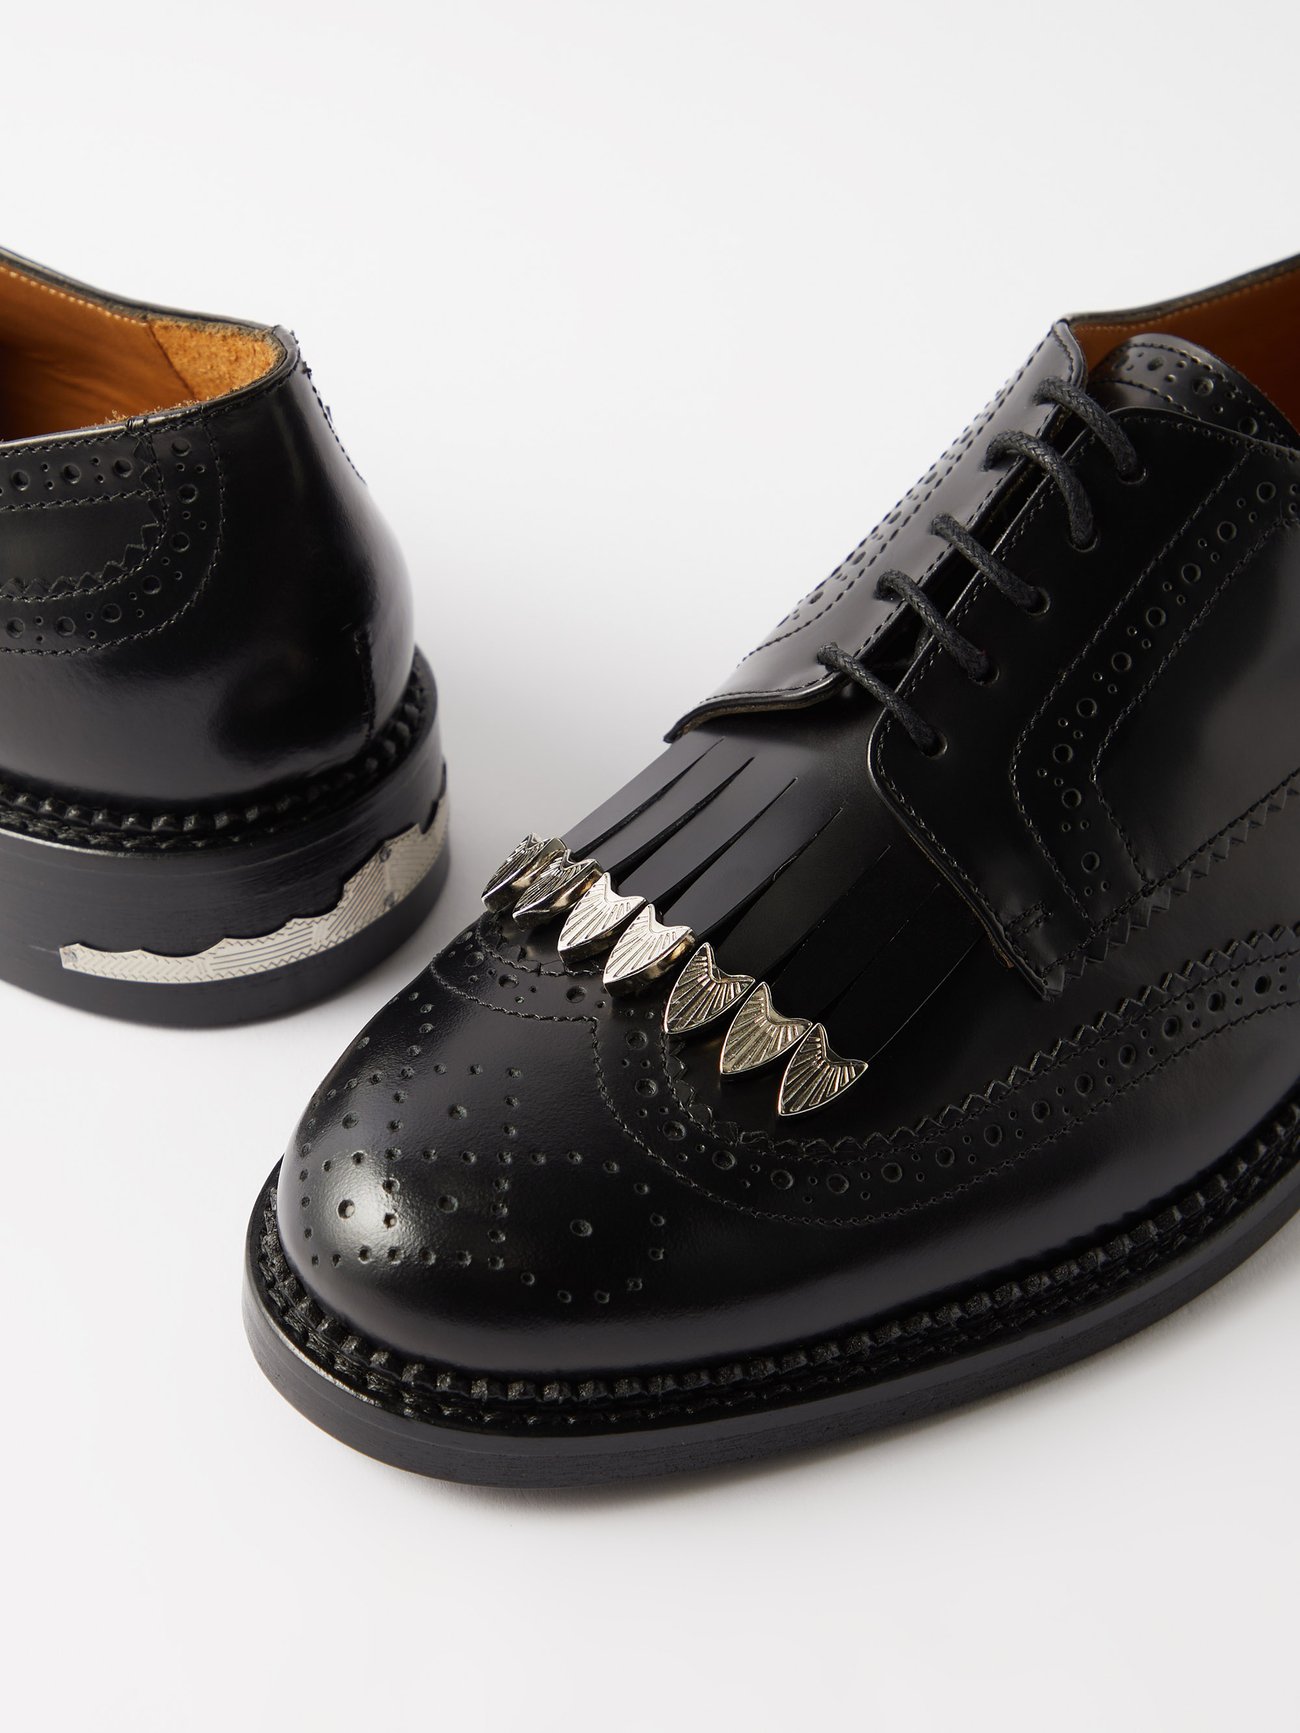 Polida fringed leather brogues